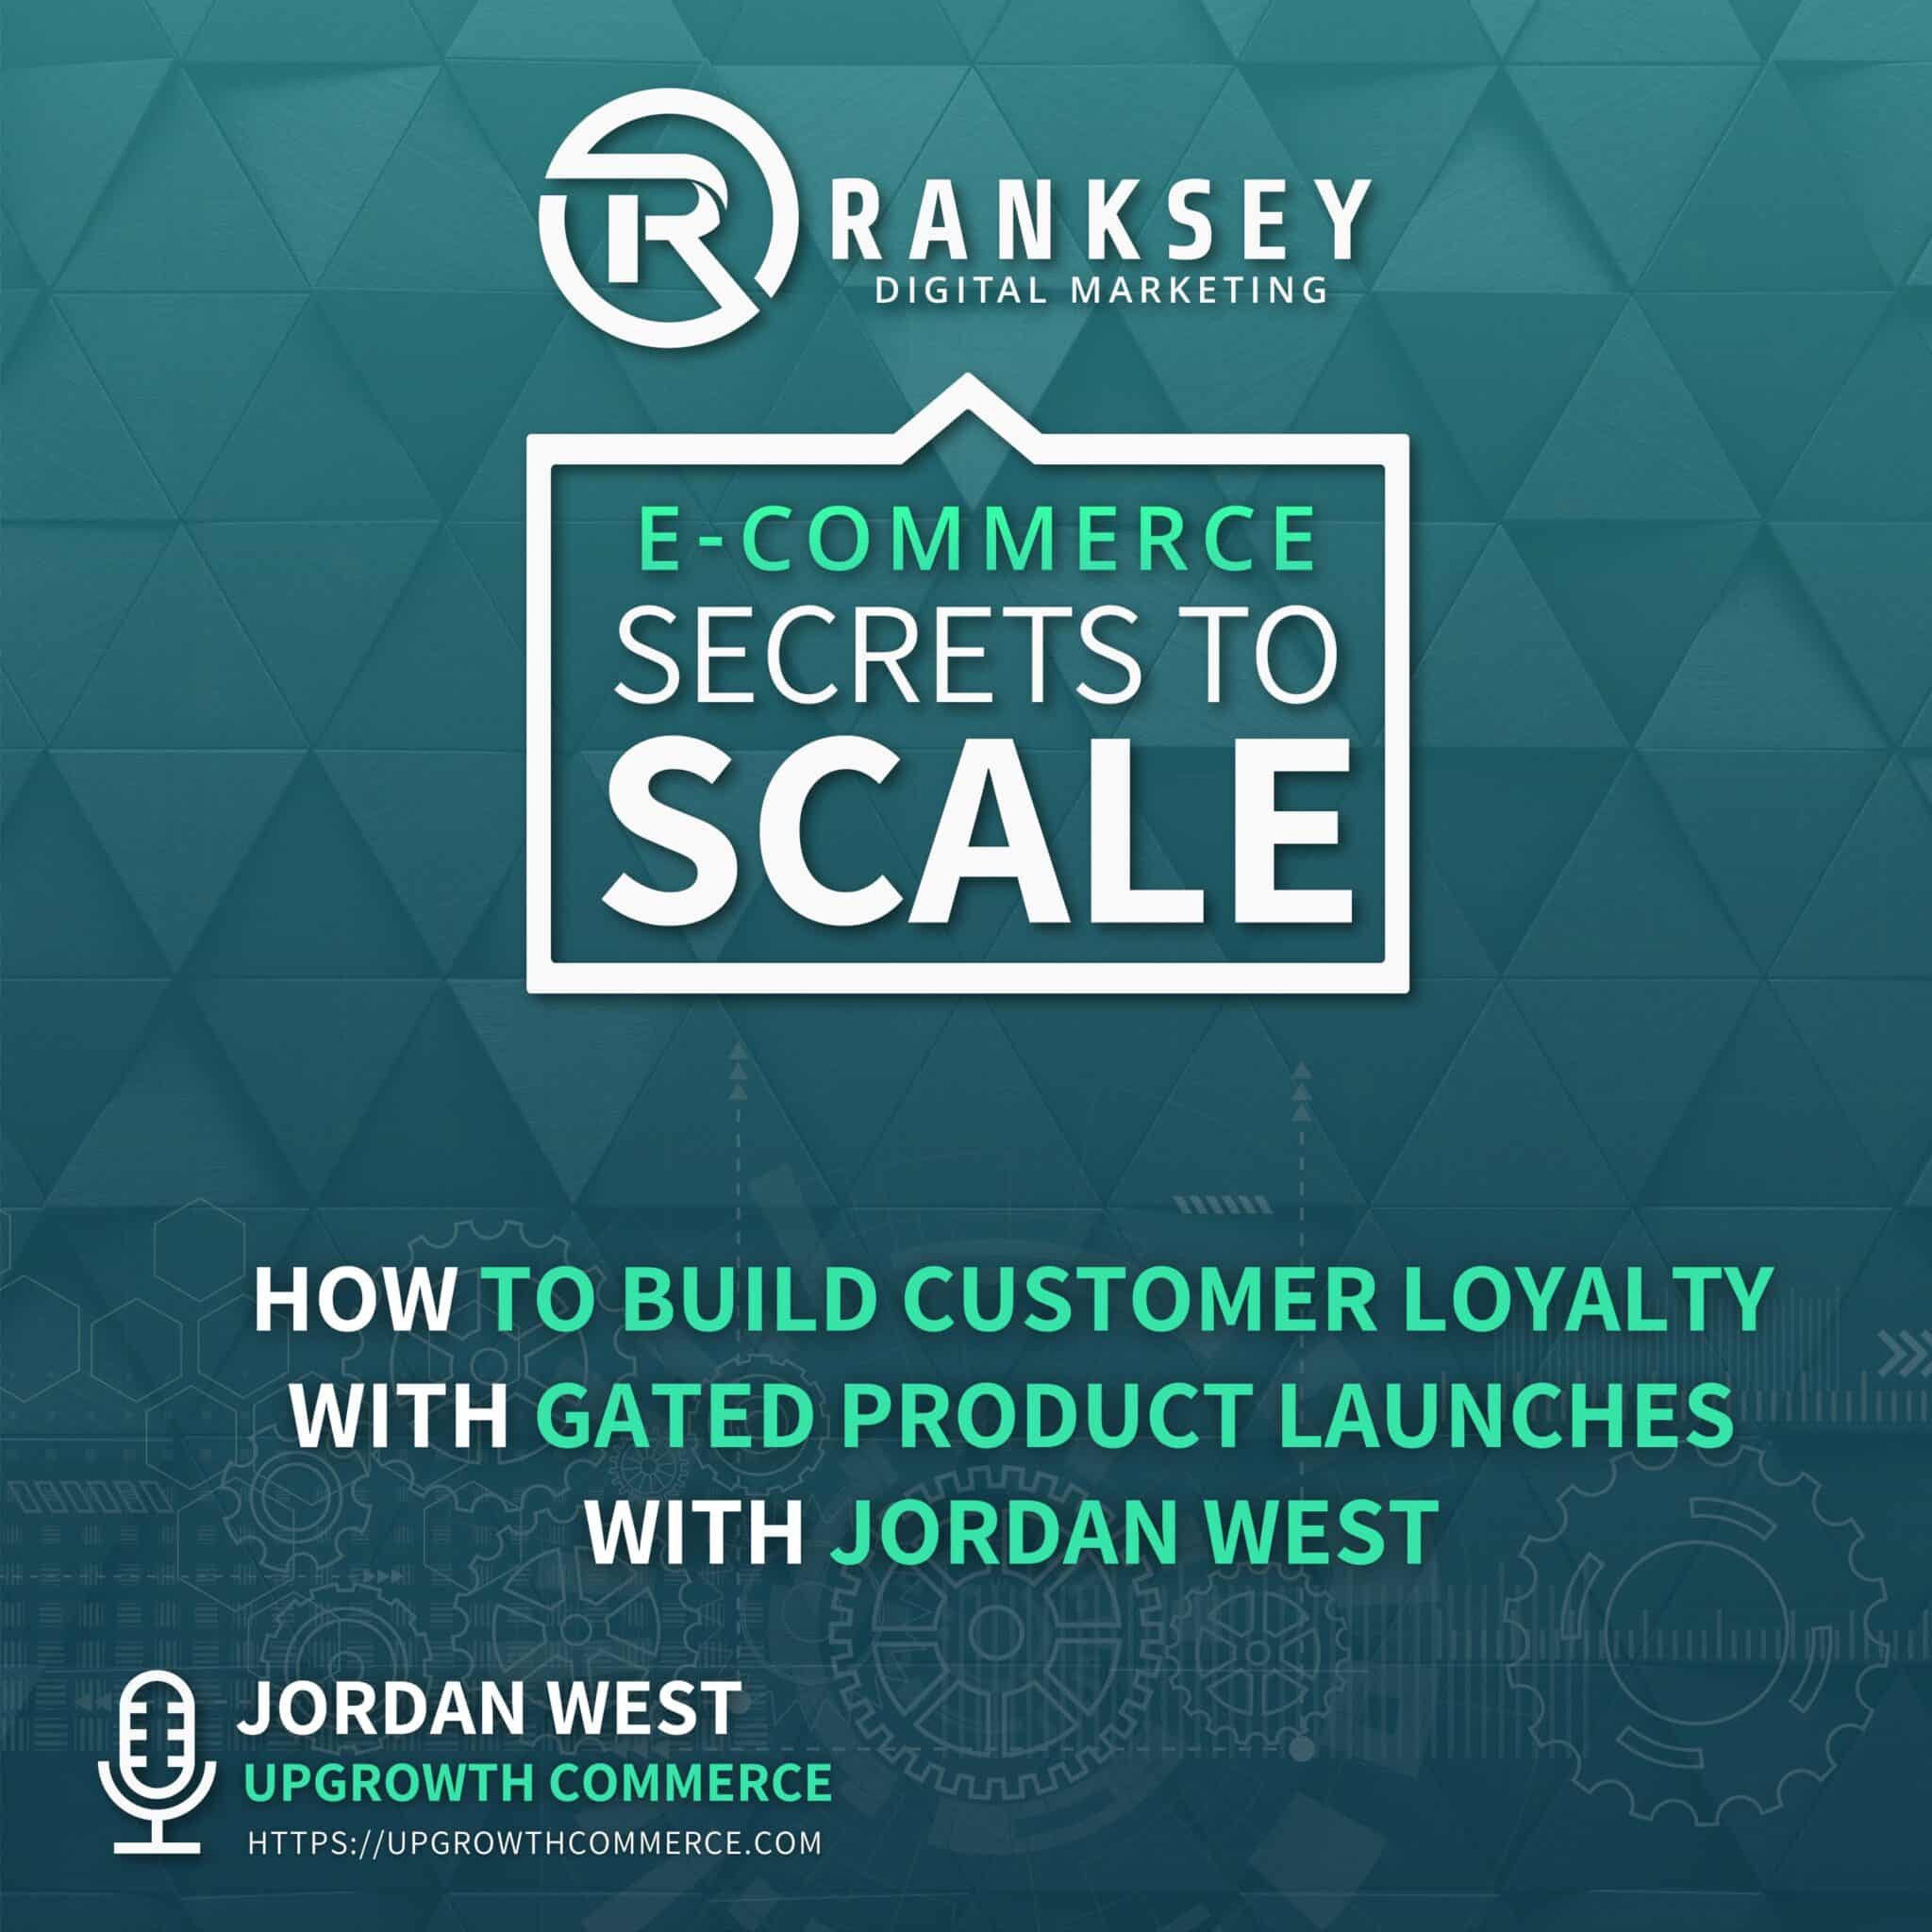 125-How-To-Build-Customer-Loyalty-With-Gated-Product-Launches-With-Jordan-West-scaled.jpg